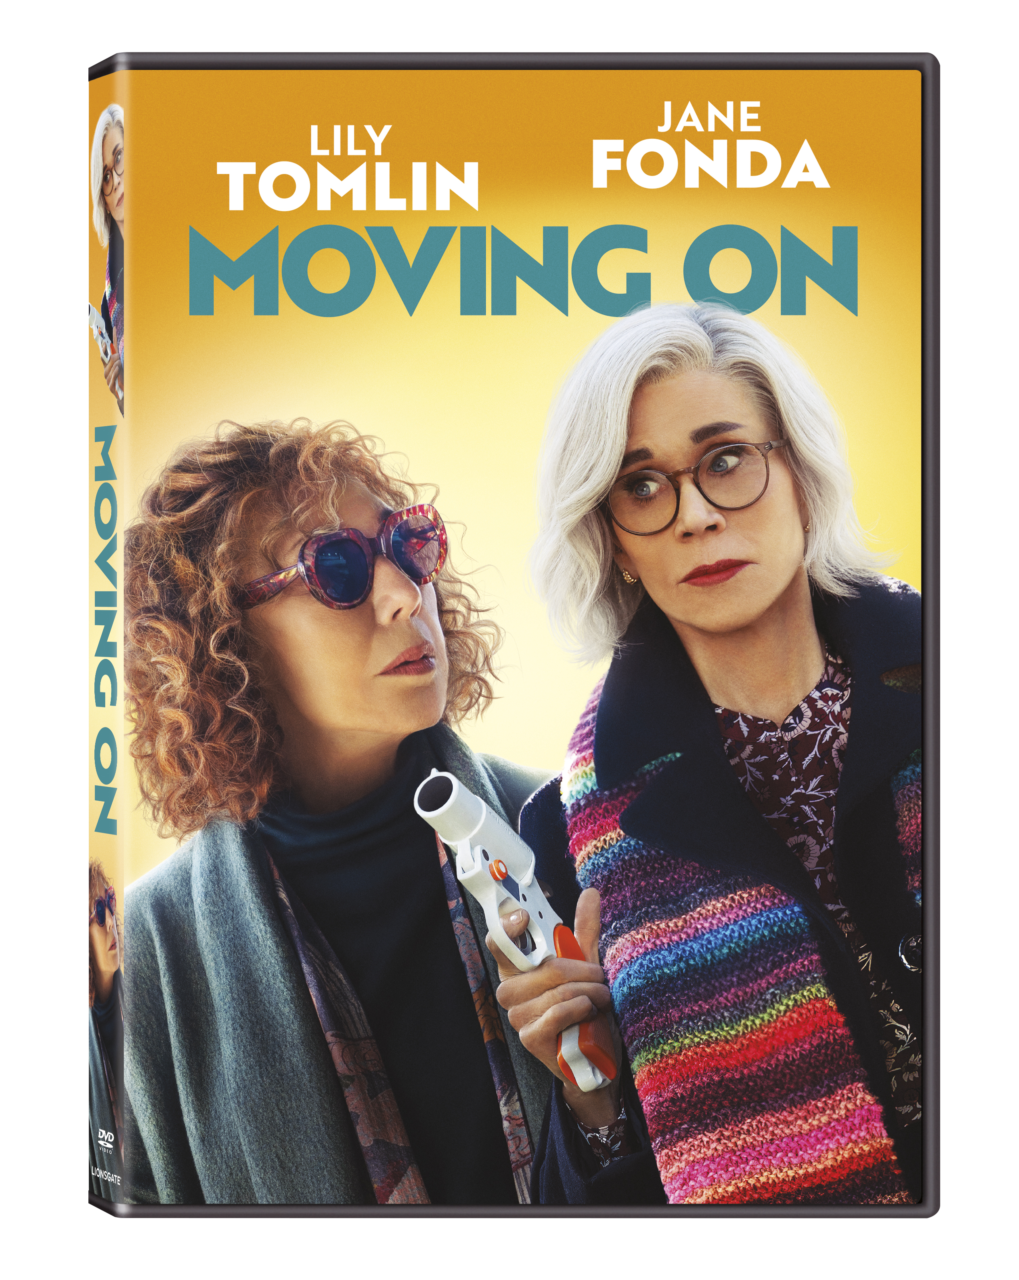 Moving On DVD cover (Lionsgate)